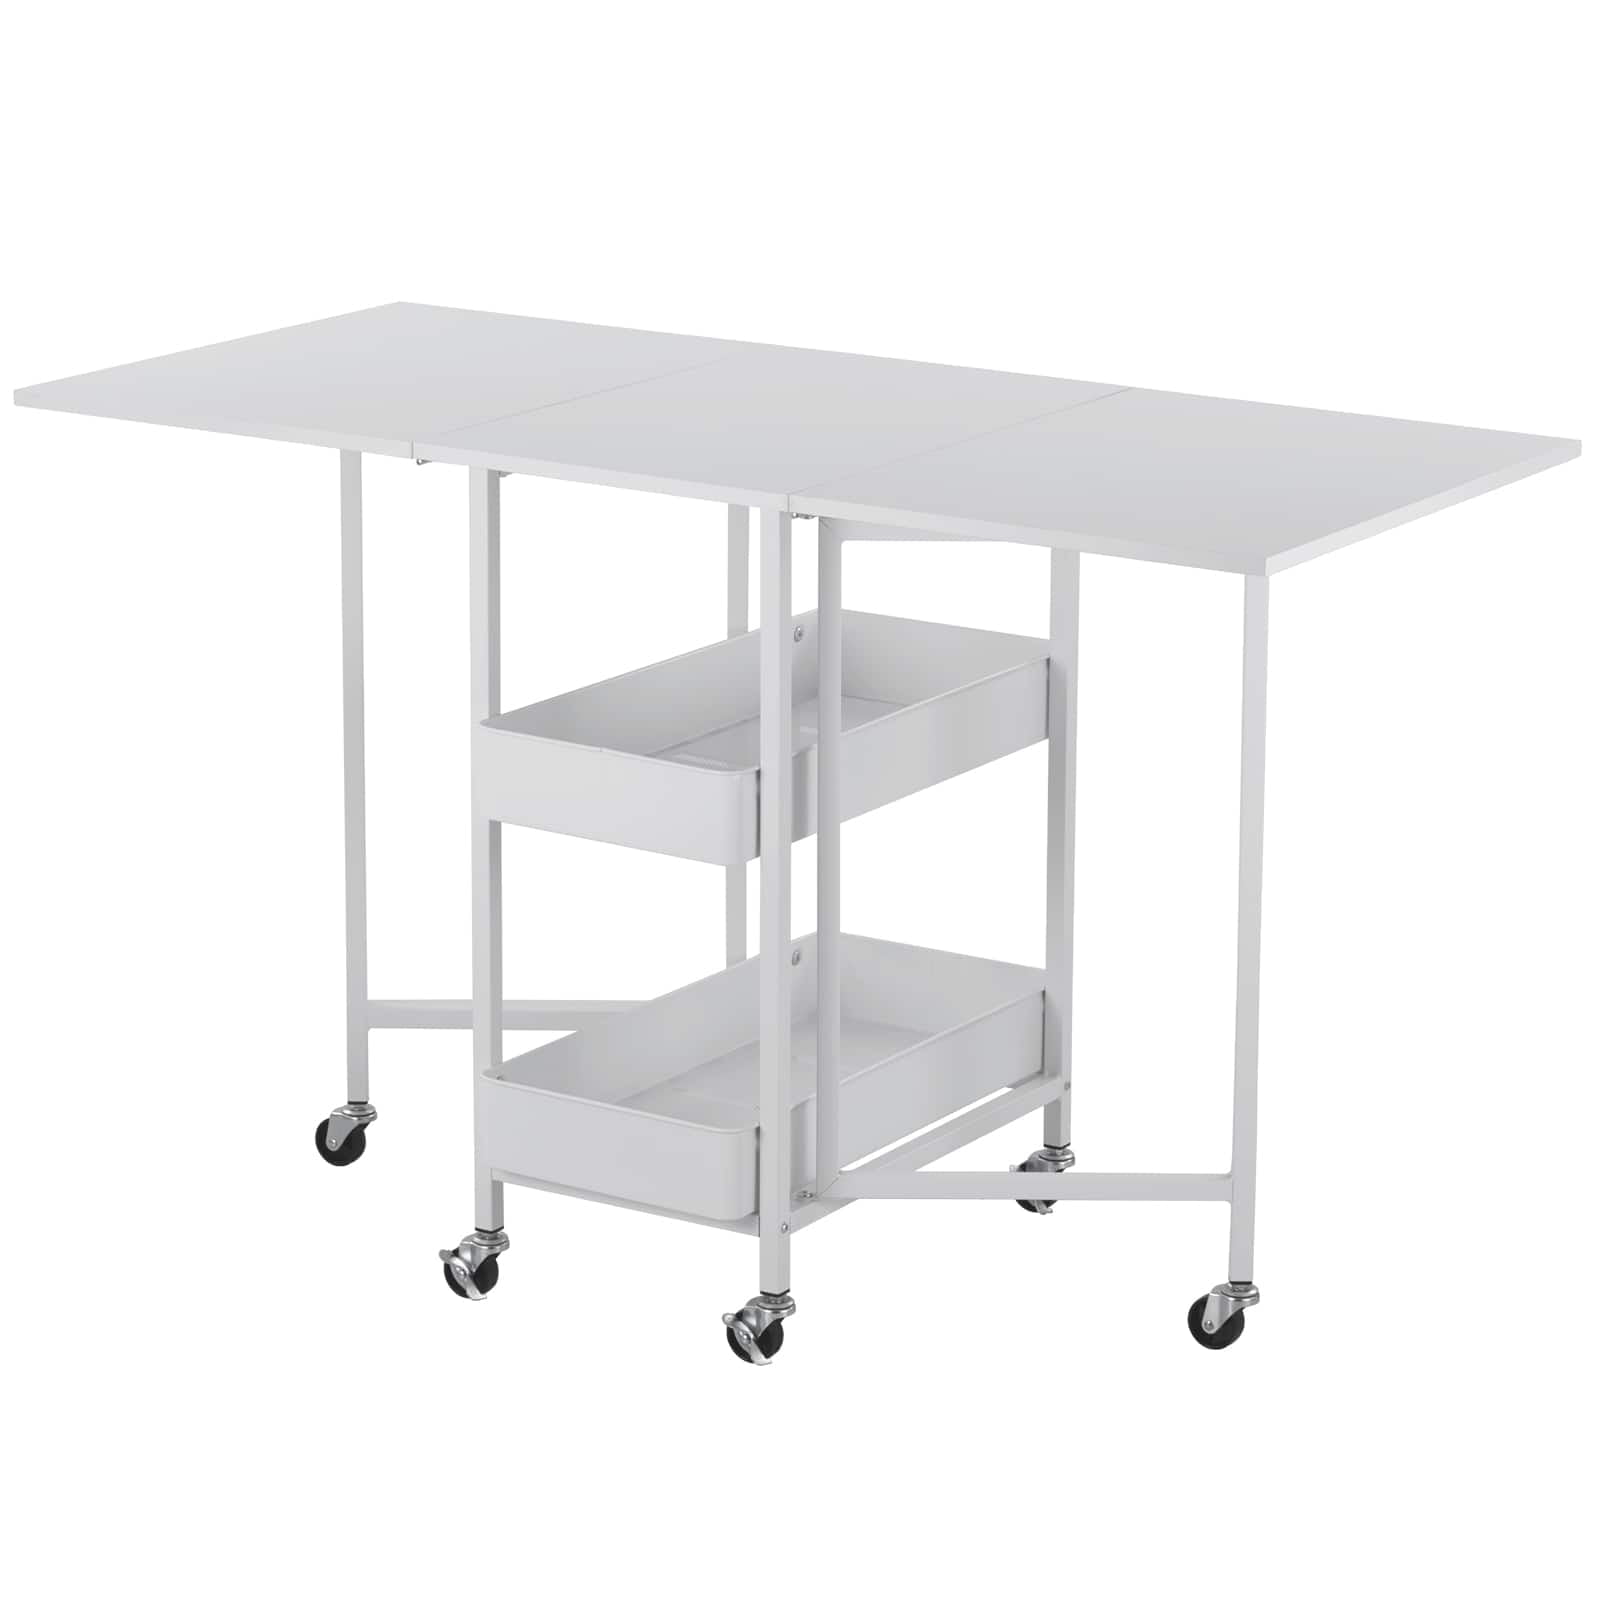 MICHAELS Kensington Table Rolling Cart by Simply Tidy™ - 1